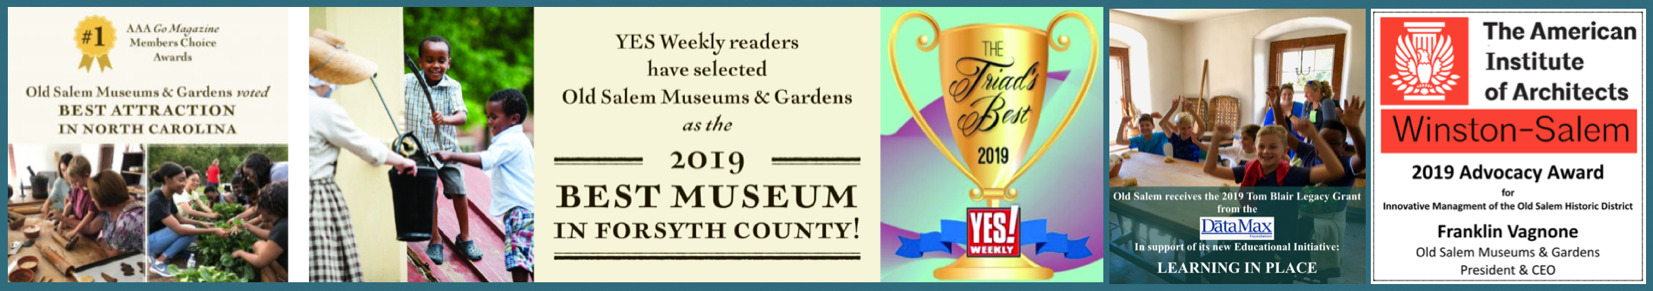 Graphics announcing awards from media and organizations recognizing the museum as one of the best attractions in the area